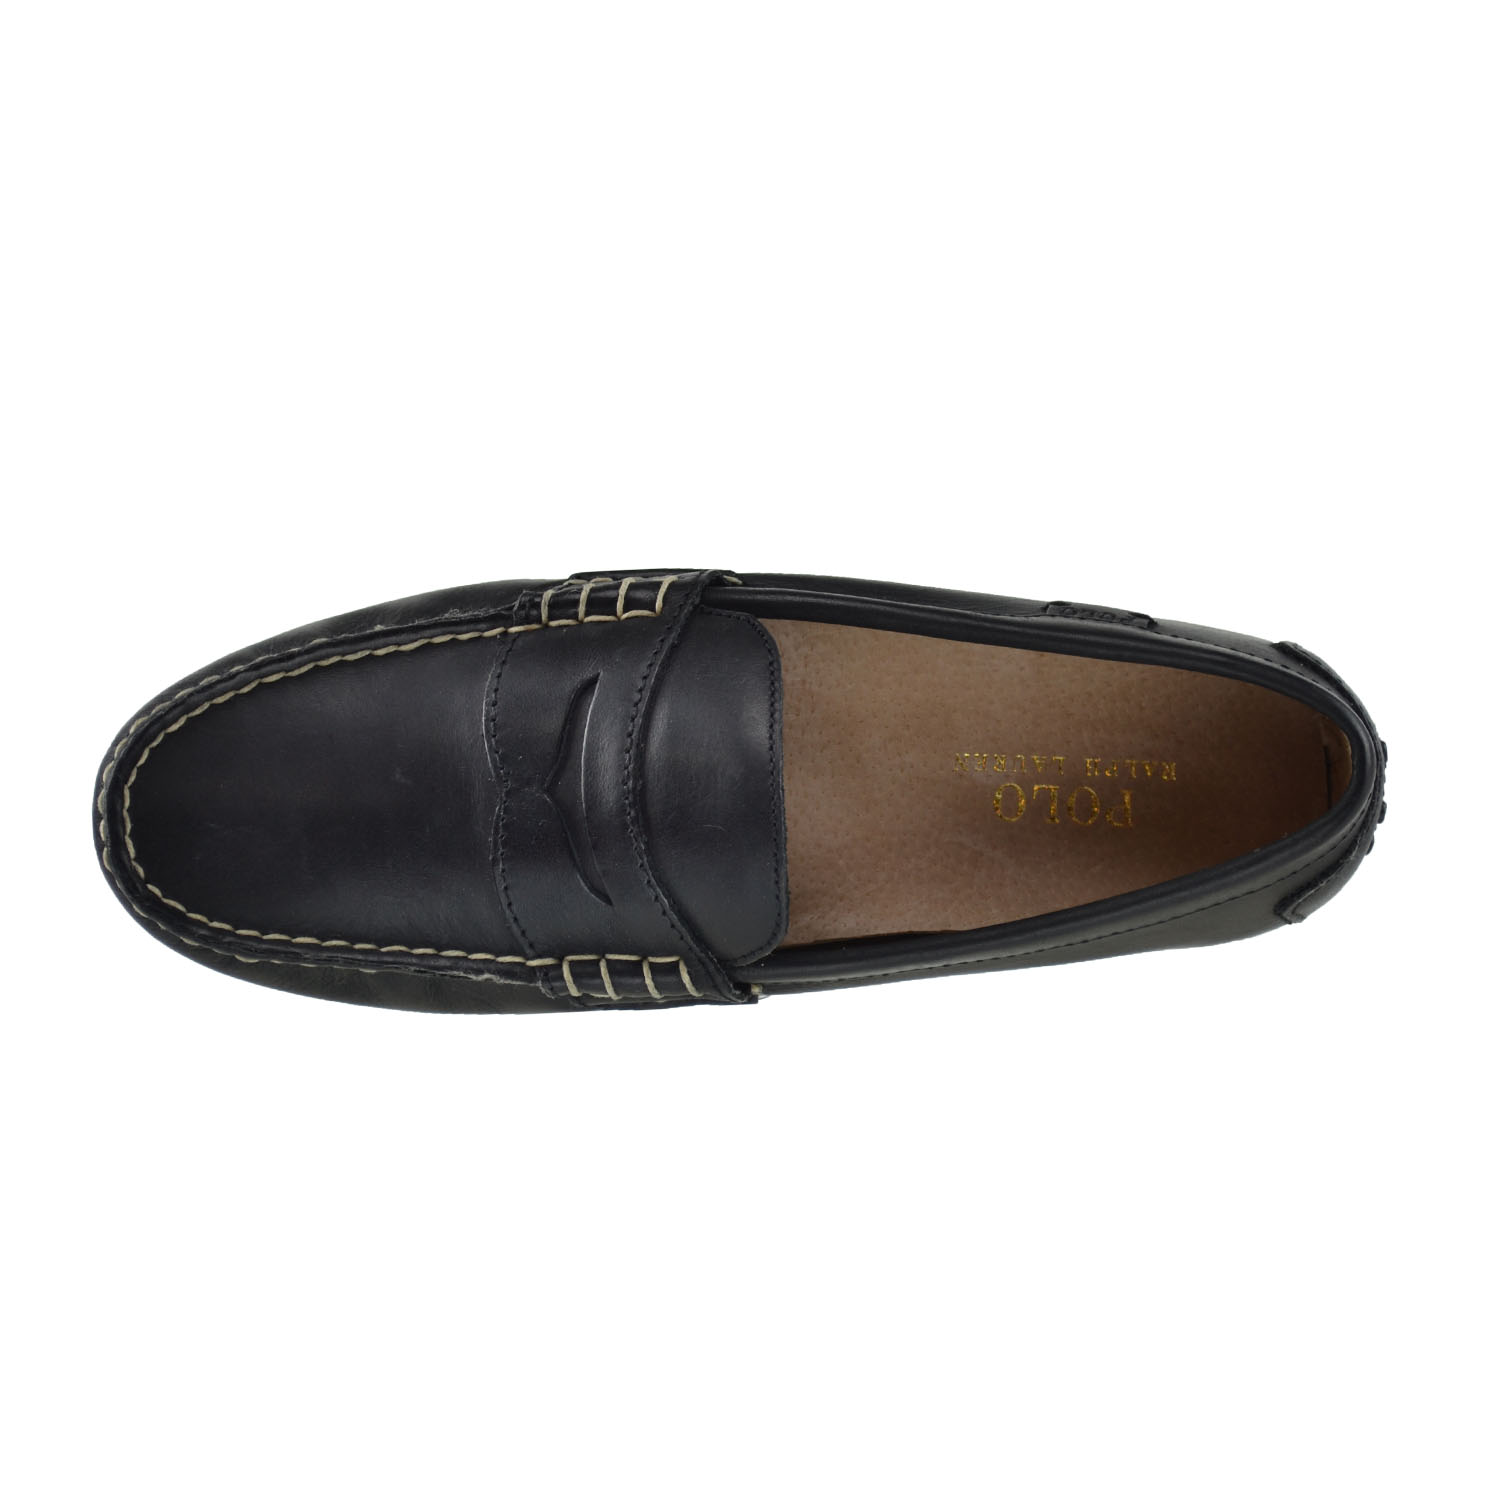 Polo Ralph Lauren Wes Smooth Pull Up Men's Loafers Black 803200174-001 - image 5 of 6